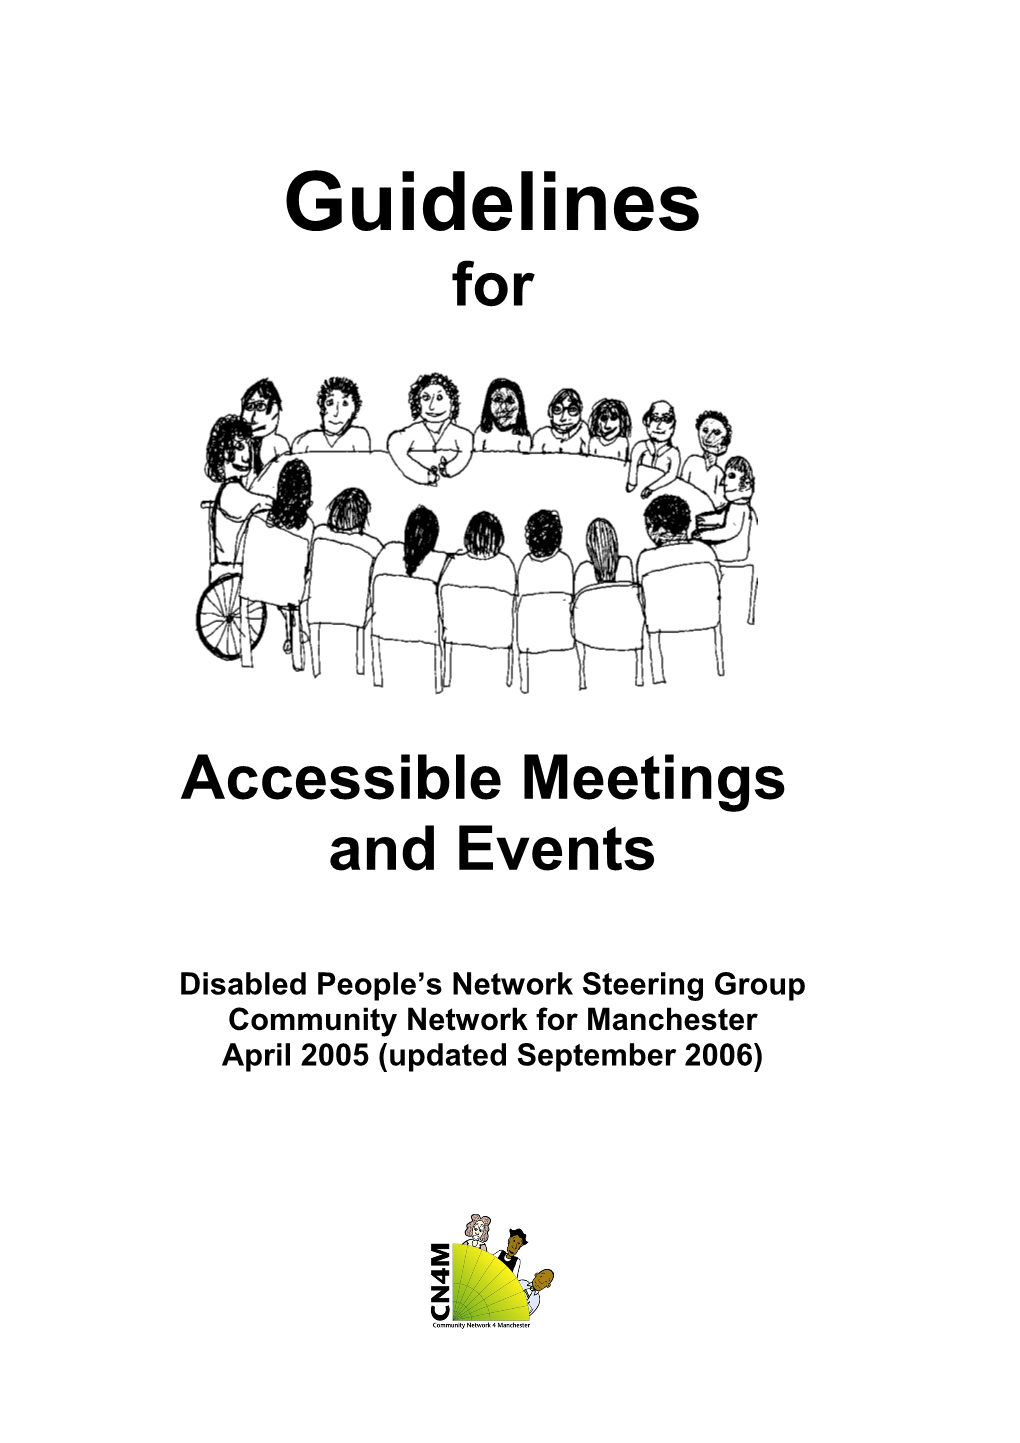 Guidelines for Accessible Meetings and Events